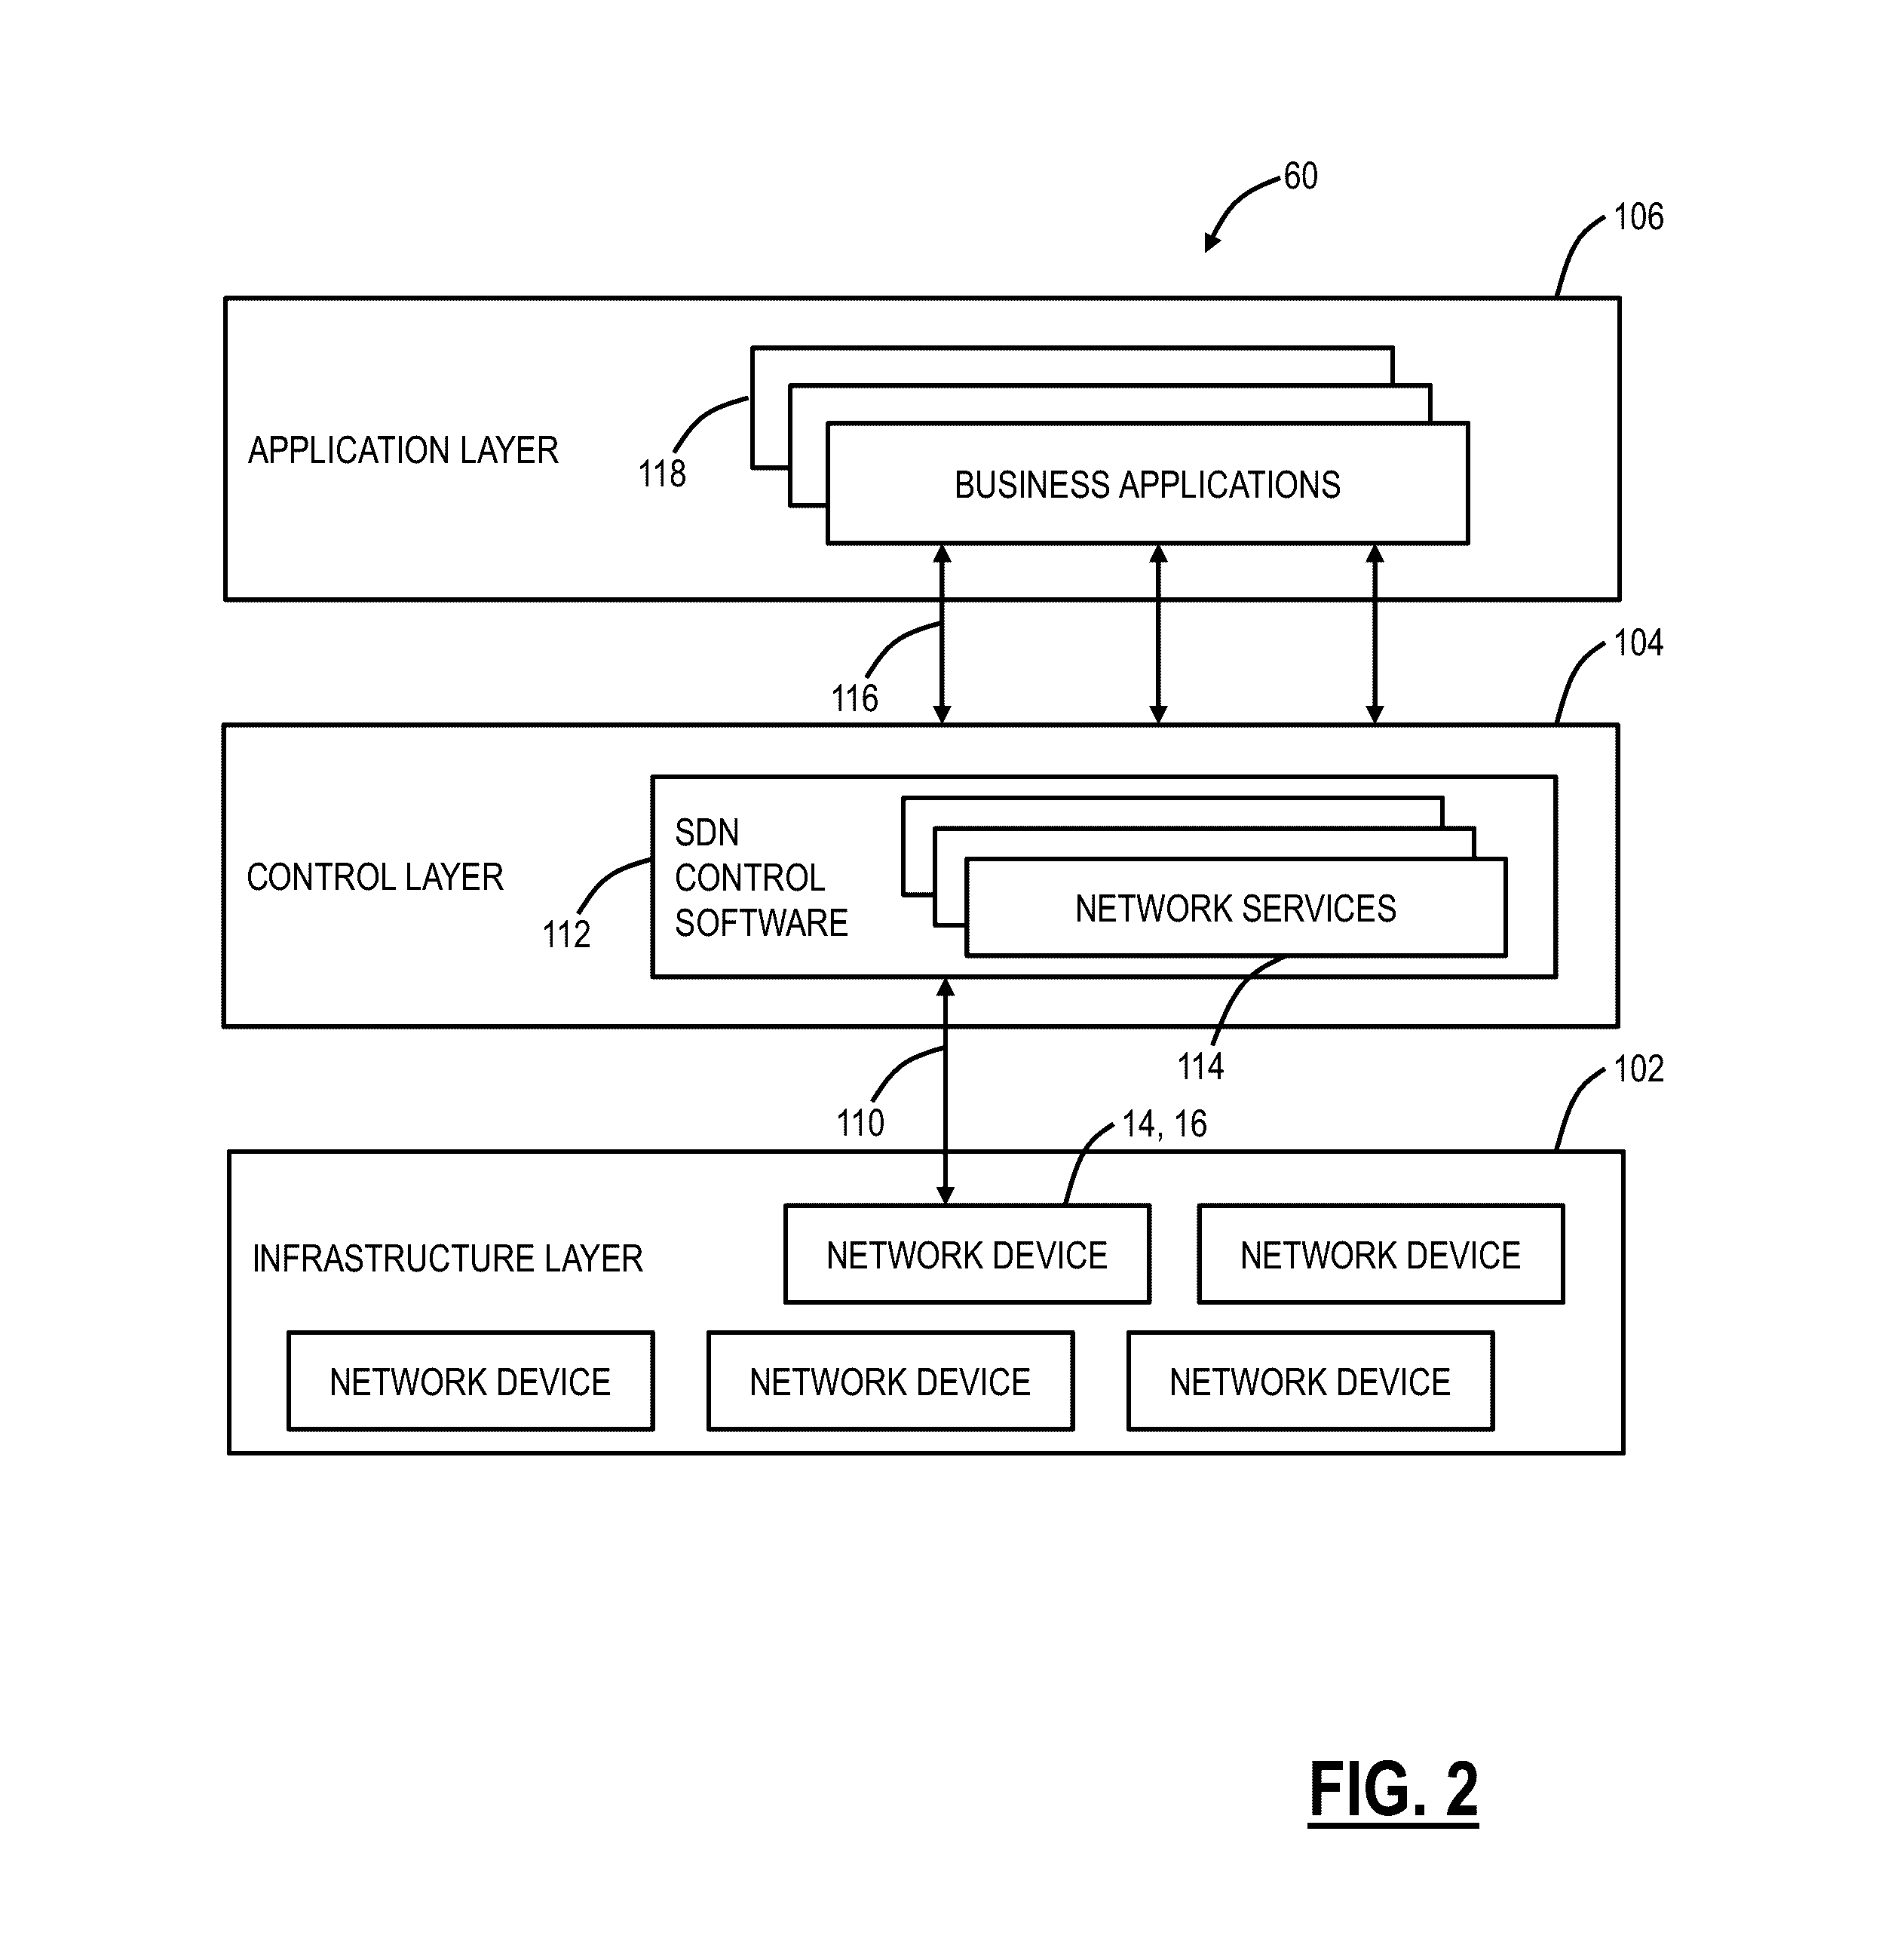 Systems and methods for tracking, predicting, and mitigating advanced persistent threats in networks